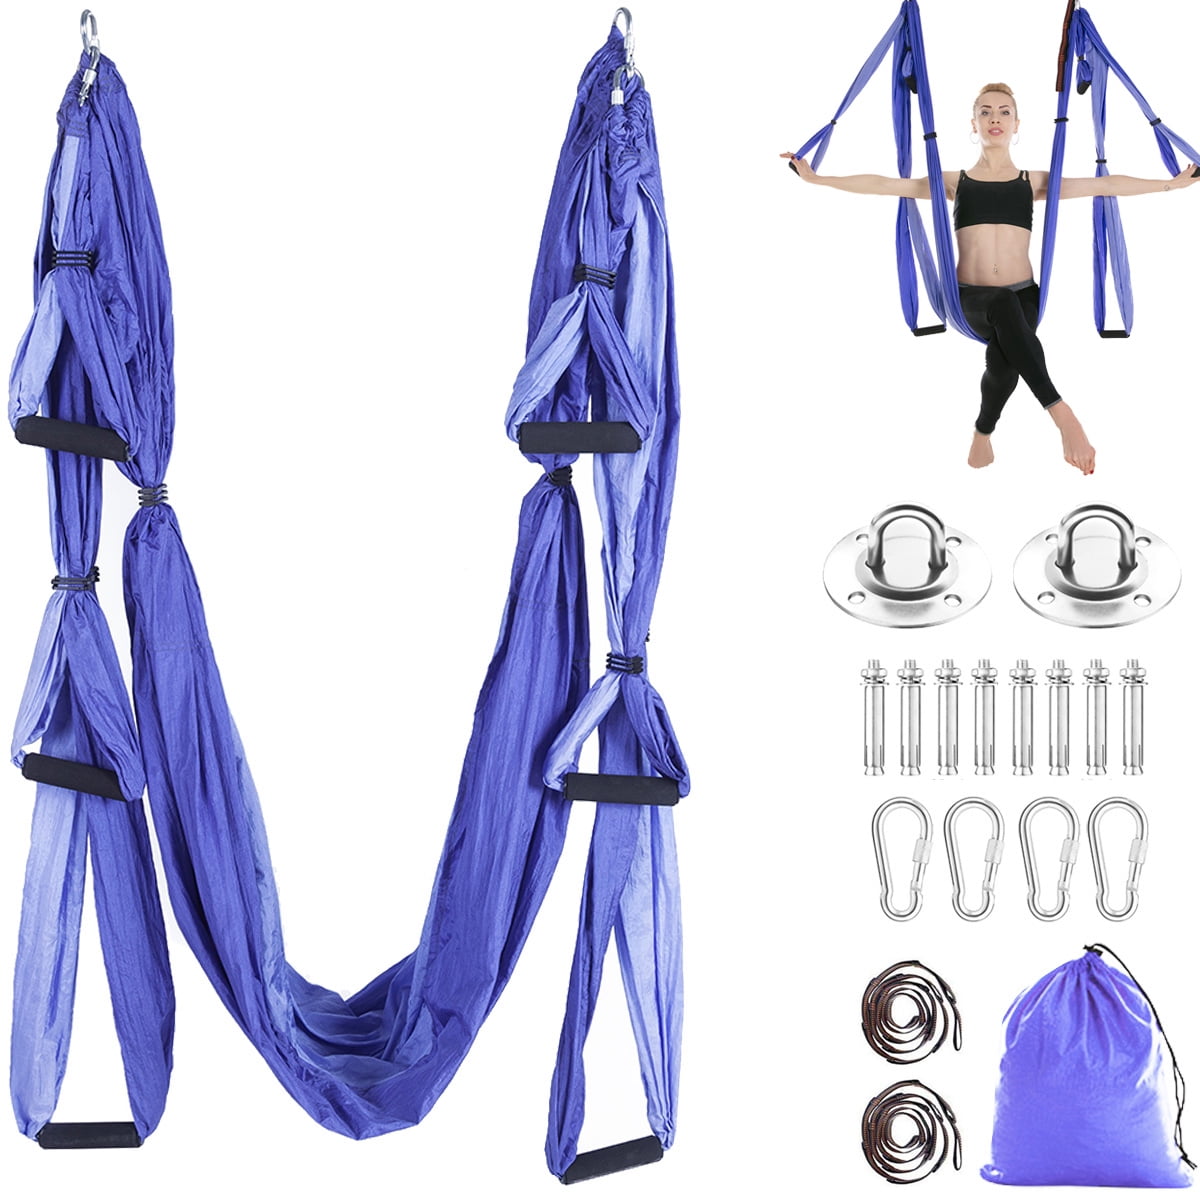 Yoga Swing Flying Hammock Hanging Chair Ultra Strong Aerial Workout Sling Chairs 